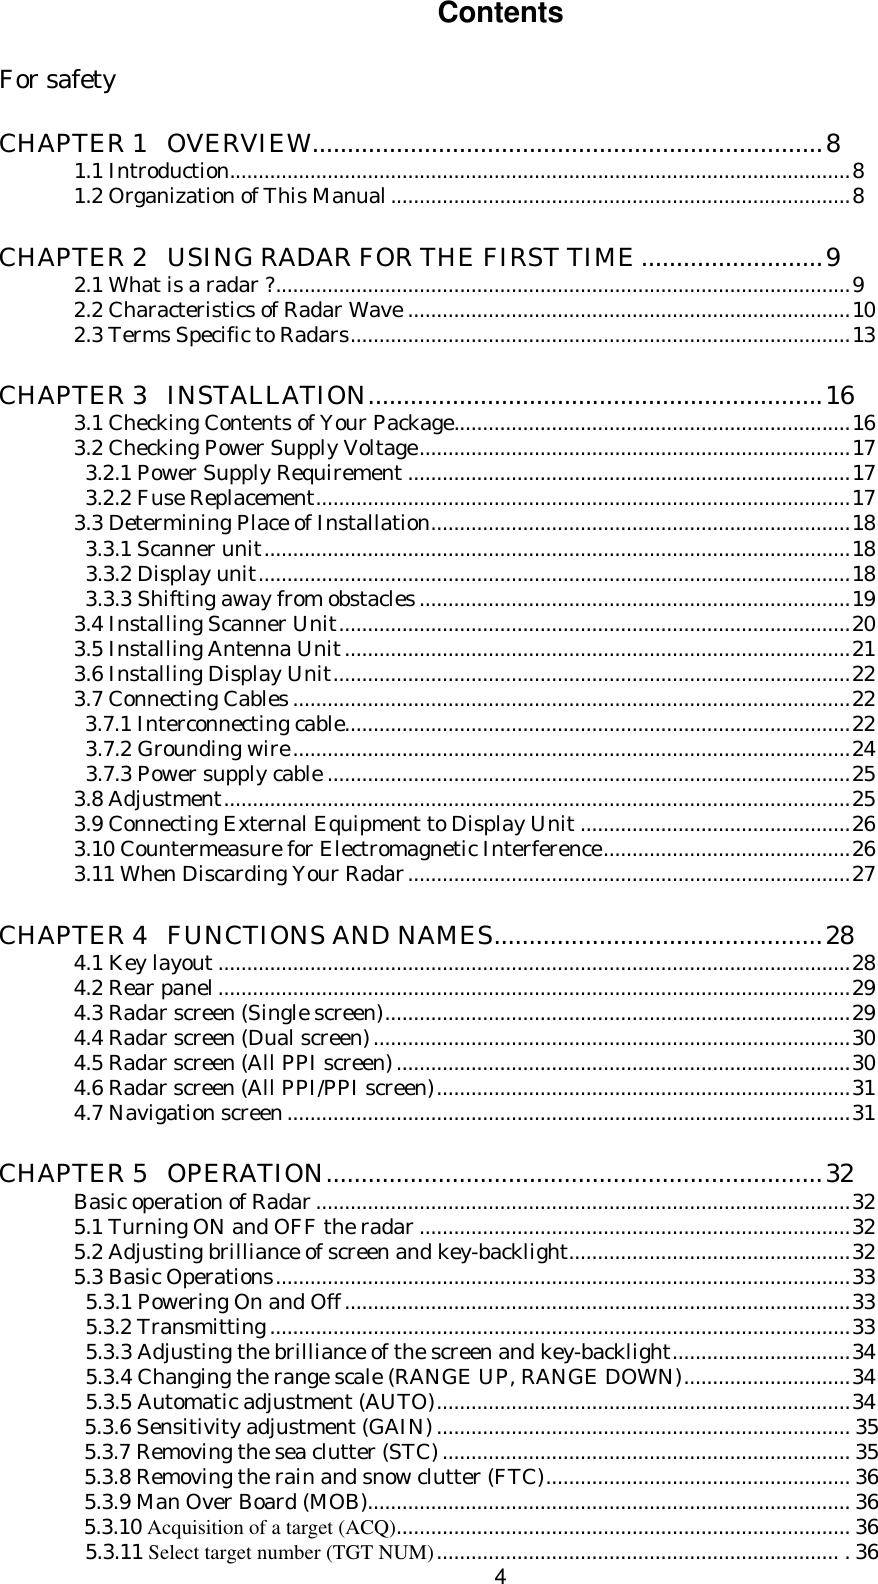  4Contents  For safety  CHAPTER 1   OVERVIEW.........................................................................8  1.1 Introduction............................................................................................................8  1.2 Organization of This Manual................................................................................8  CHAPTER 2   USING RADAR FOR THE FIRST TIME..........................9  2.1 What is a radar ?....................................................................................................9  2.2 Characteristics of Radar Wave .............................................................................10  2.3 Terms Specific to Radars.......................................................................................13  CHAPTER 3   INSTALLATION.................................................................16  3.1 Checking Contents of Your Package.....................................................................16  3.2 Checking Power Supply Voltage...........................................................................17    3.2.1 Power Supply Requirement .............................................................................17    3.2.2 Fuse Replacement.............................................................................................17  3.3 Determining Place of Installation.........................................................................18    3.3.1 Scanner unit......................................................................................................18    3.3.2 Display unit.......................................................................................................18     3.3.3 Shifting away from obstacles ...........................................................................19  3.4 Installing Scanner Unit.........................................................................................20  3.5 Installing Antenna Unit........................................................................................21  3.6 Installing Display Unit..........................................................................................22  3.7 Connecting Cables .................................................................................................22                3.7.1 Interconnecting cable........................................................................................22     3.7.2 Grounding wire.................................................................................................24    3.7.3 Power supply cable ...........................................................................................25  3.8 Adjustment.............................................................................................................25  3.9 Connecting External Equipment to Display Unit ...............................................26  3.10 Countermeasure for Electromagnetic Interference...........................................26  3.11 When Discarding Your Radar.............................................................................27  CHAPTER 4   FUNCTIONS AND NAMES...............................................28  4.1 Key layout ..............................................................................................................28  4.2 Rear panel..............................................................................................................29  4.3 Radar screen (Single screen).................................................................................29  4.4 Radar screen (Dual screen)...................................................................................30  4.5 Radar screen (All PPI screen)...............................................................................30  4.6 Radar screen (All PPI/PPI screen)........................................................................31  4.7 Navigation screen ..................................................................................................31  CHAPTER 5   OPERATION.......................................................................32  Basic operation of Radar .............................................................................................32  5.1 Turning ON and OFF the radar ...........................................................................32  5.2 Adjusting brilliance of screen and key-backlight.................................................32  5.3 Basic Operations....................................................................................................33    5.3.1 Powering On and Off........................................................................................33    5.3.2 Transmitting .....................................................................................................33    5.3.3 Adjusting the brilliance of the screen and key-backlight...............................34    5.3.4 Changing the range scale (RANGE UP, RANGE DOWN).............................34    5.3.5 Automatic adjustment (AUTO)........................................................................34    5.3.6 Sensitivity adjustment (GAIN) ........................................................................ 35    5.3.7 Removing the sea clutter (STC) ....................................................................... 35    5.3.8 Removing the rain and snow clutter (FTC)..................................................... 36    5.3.9 Man Over Board (MOB).................................................................................... 36    5.3.10 Acquisition of a target (ACQ)............................................................................... 36    5.3.11 Select target number (TGT NUM)...................................................................... . 36 